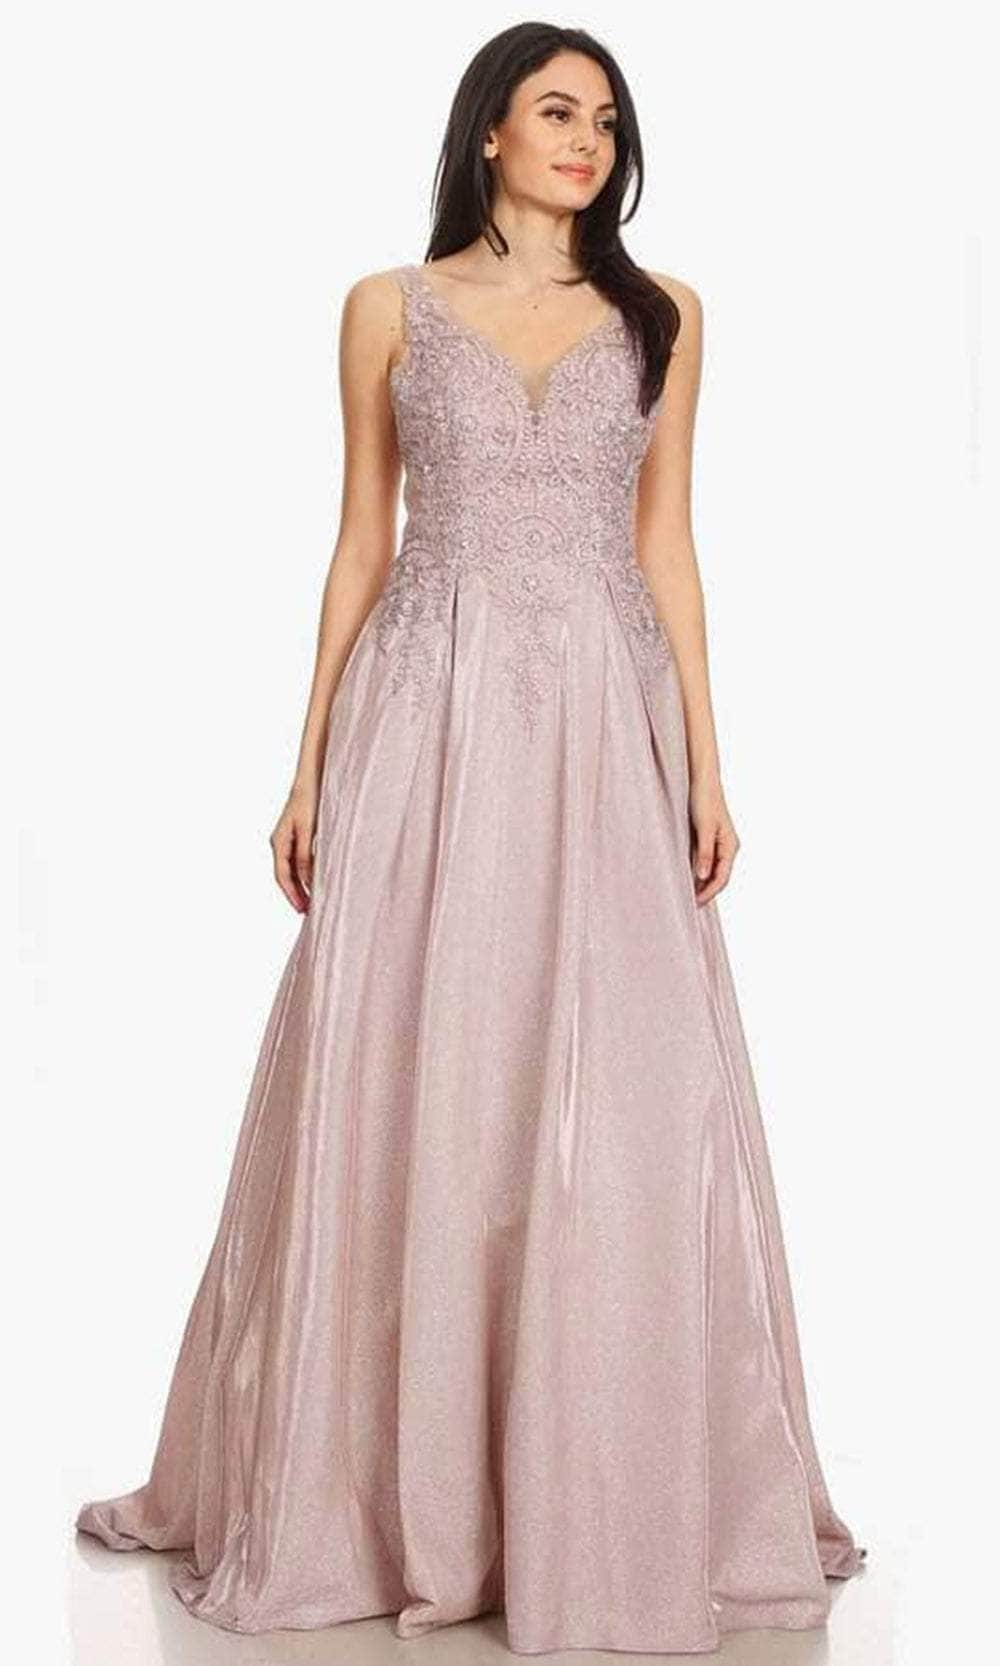 Image of Eureka Fashion 9606 - Embroidered Bodice A-Line Gown